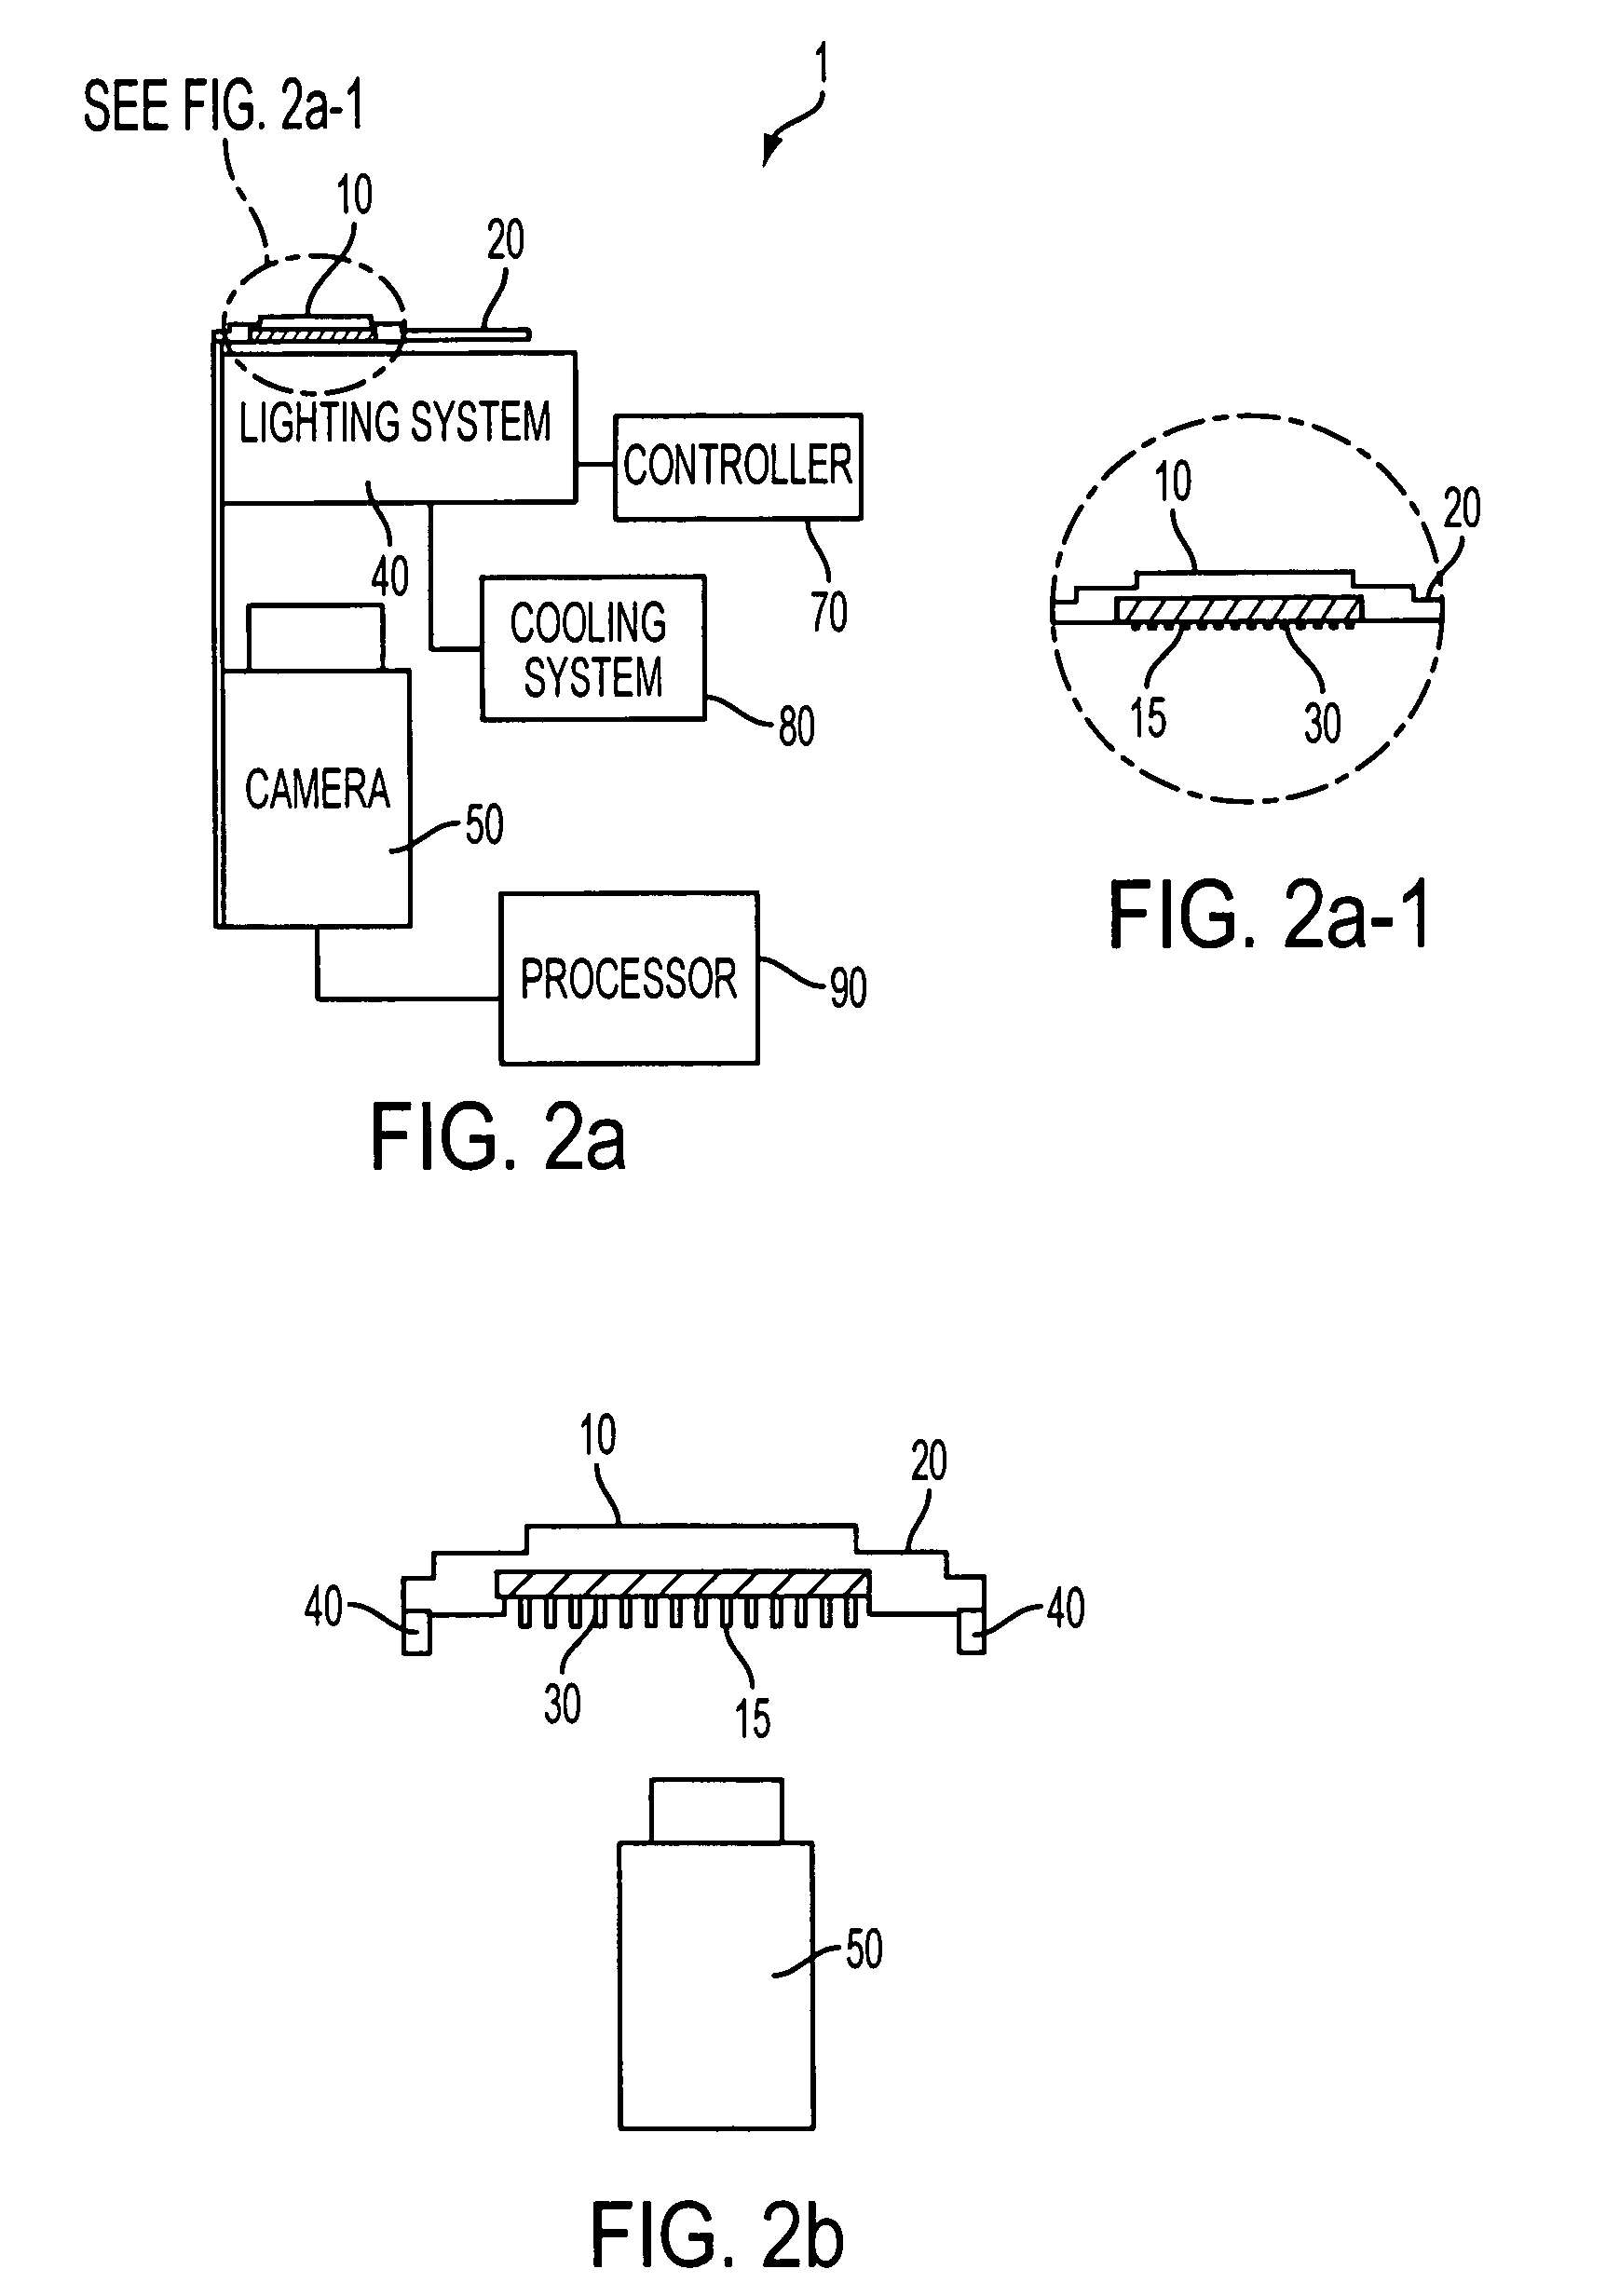 Camera based pin grid array (PGA) inspection system with pin base mask and low angle lighting